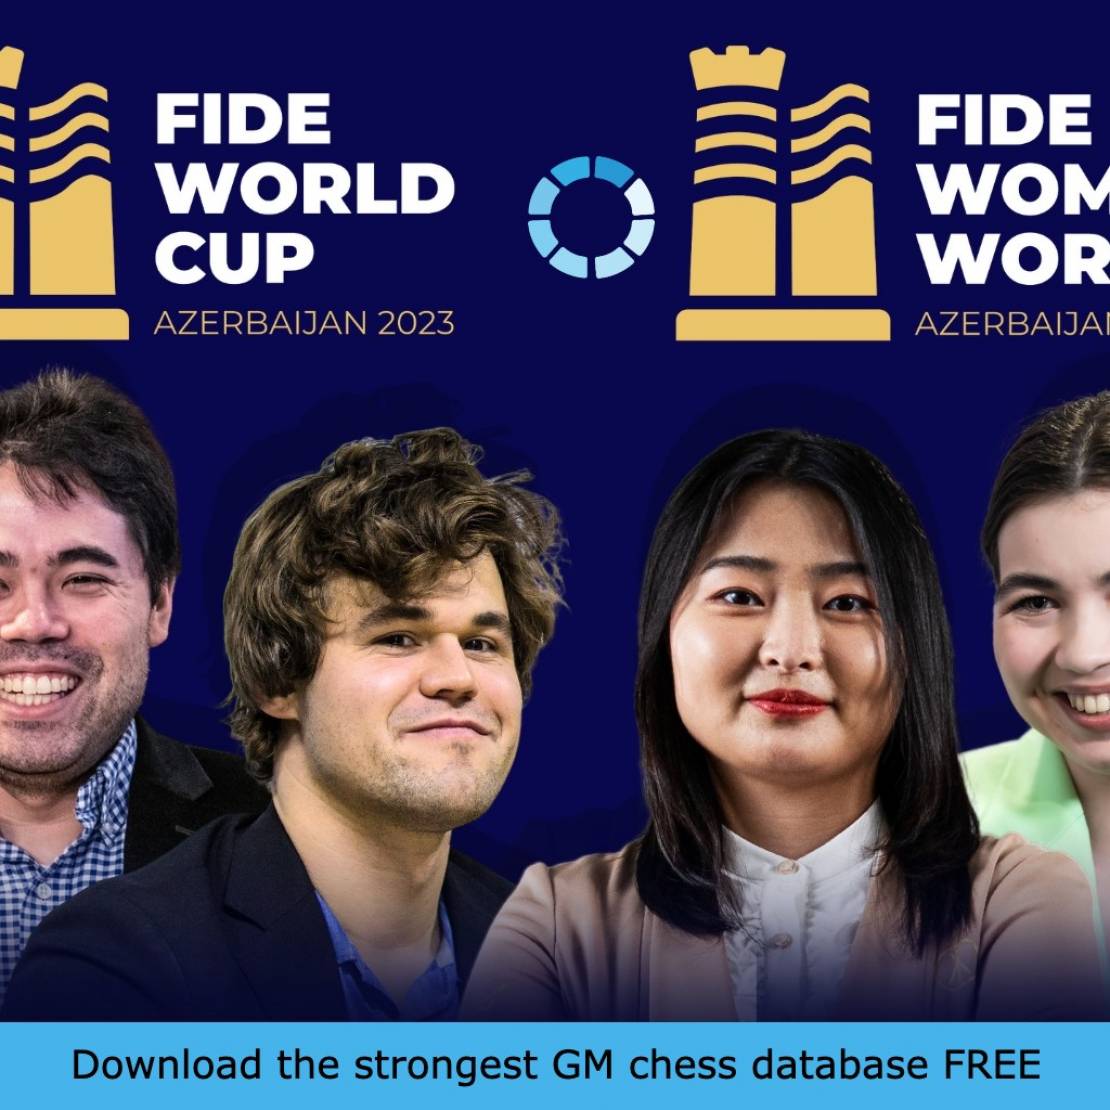 World Chess Cup 2023 in Baku, Azerbaijan brings already surprises. Download all players FREE.